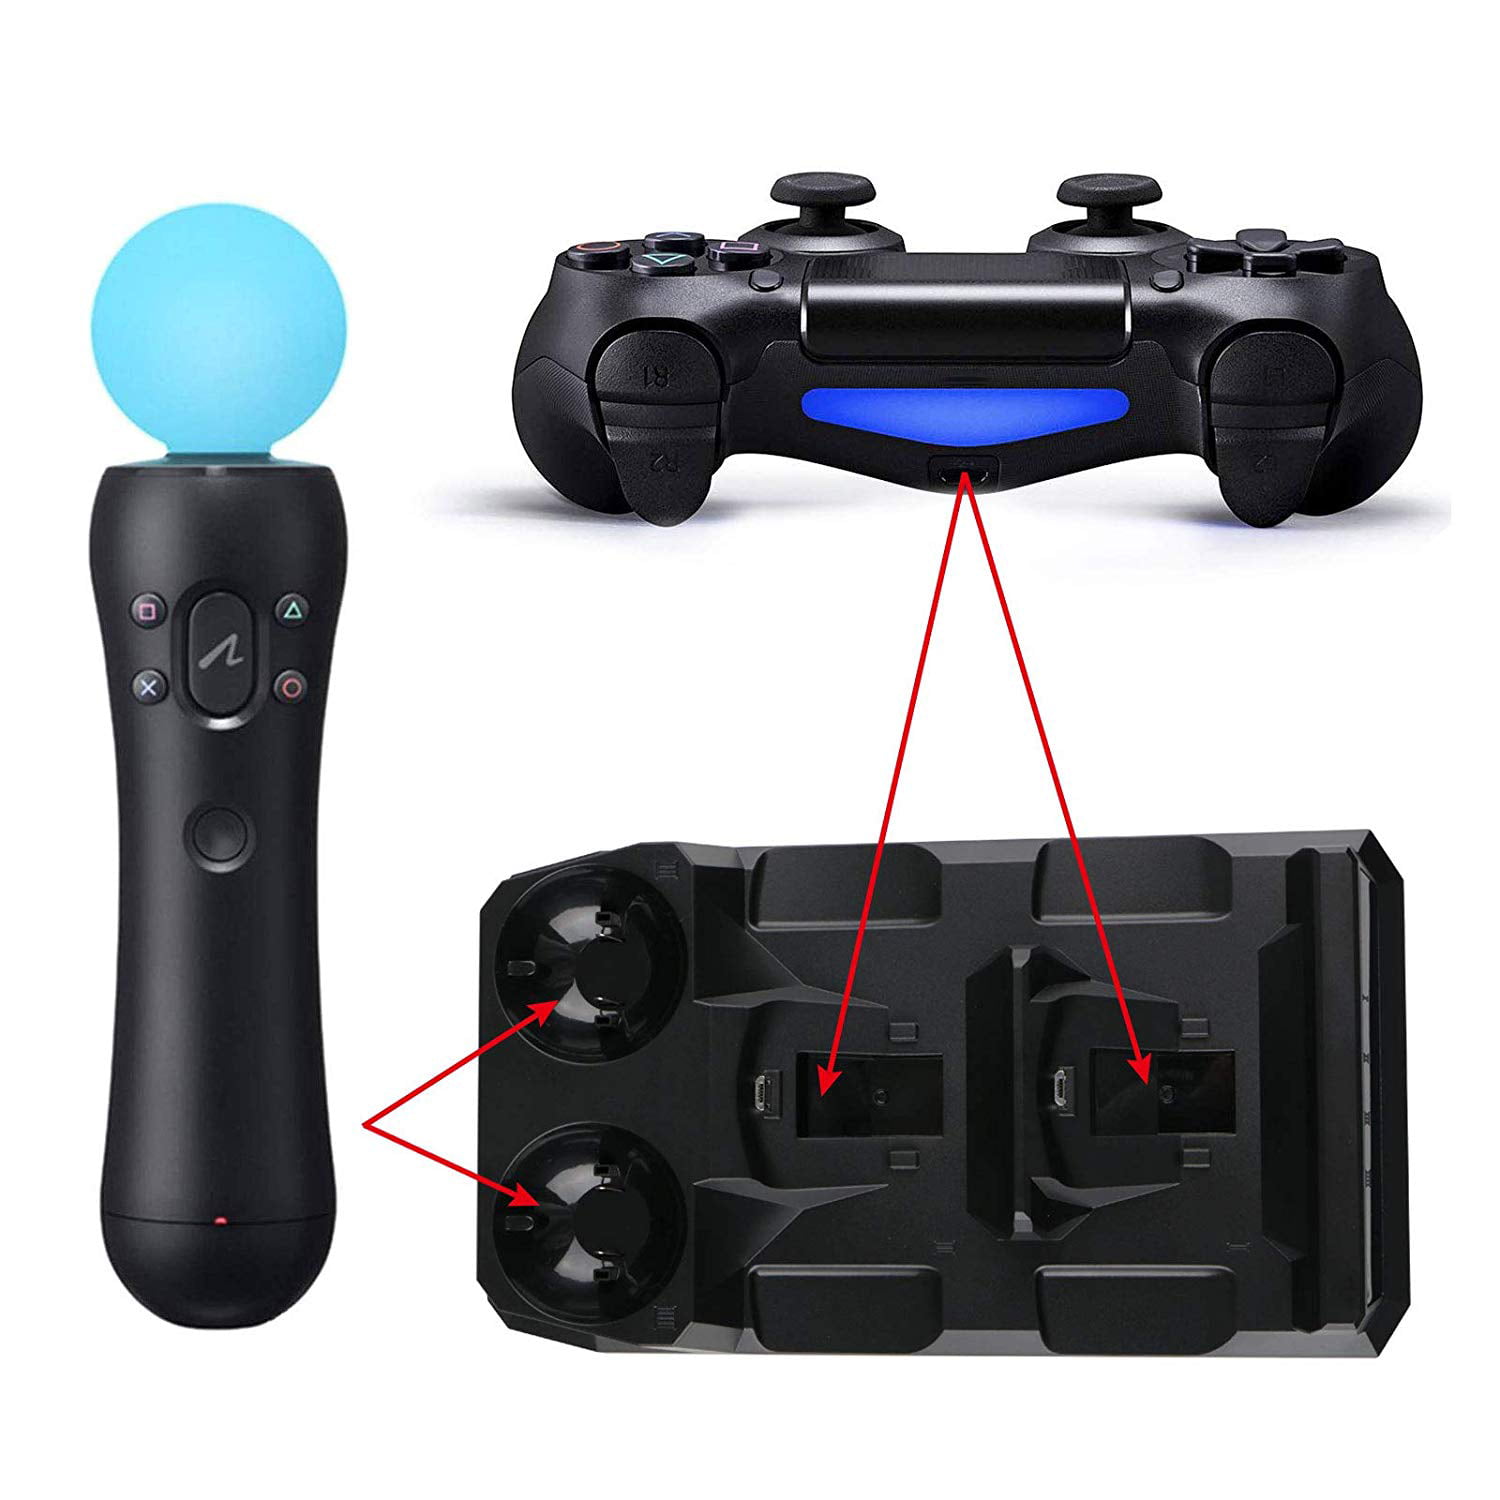 ps4 move controller work on ps3